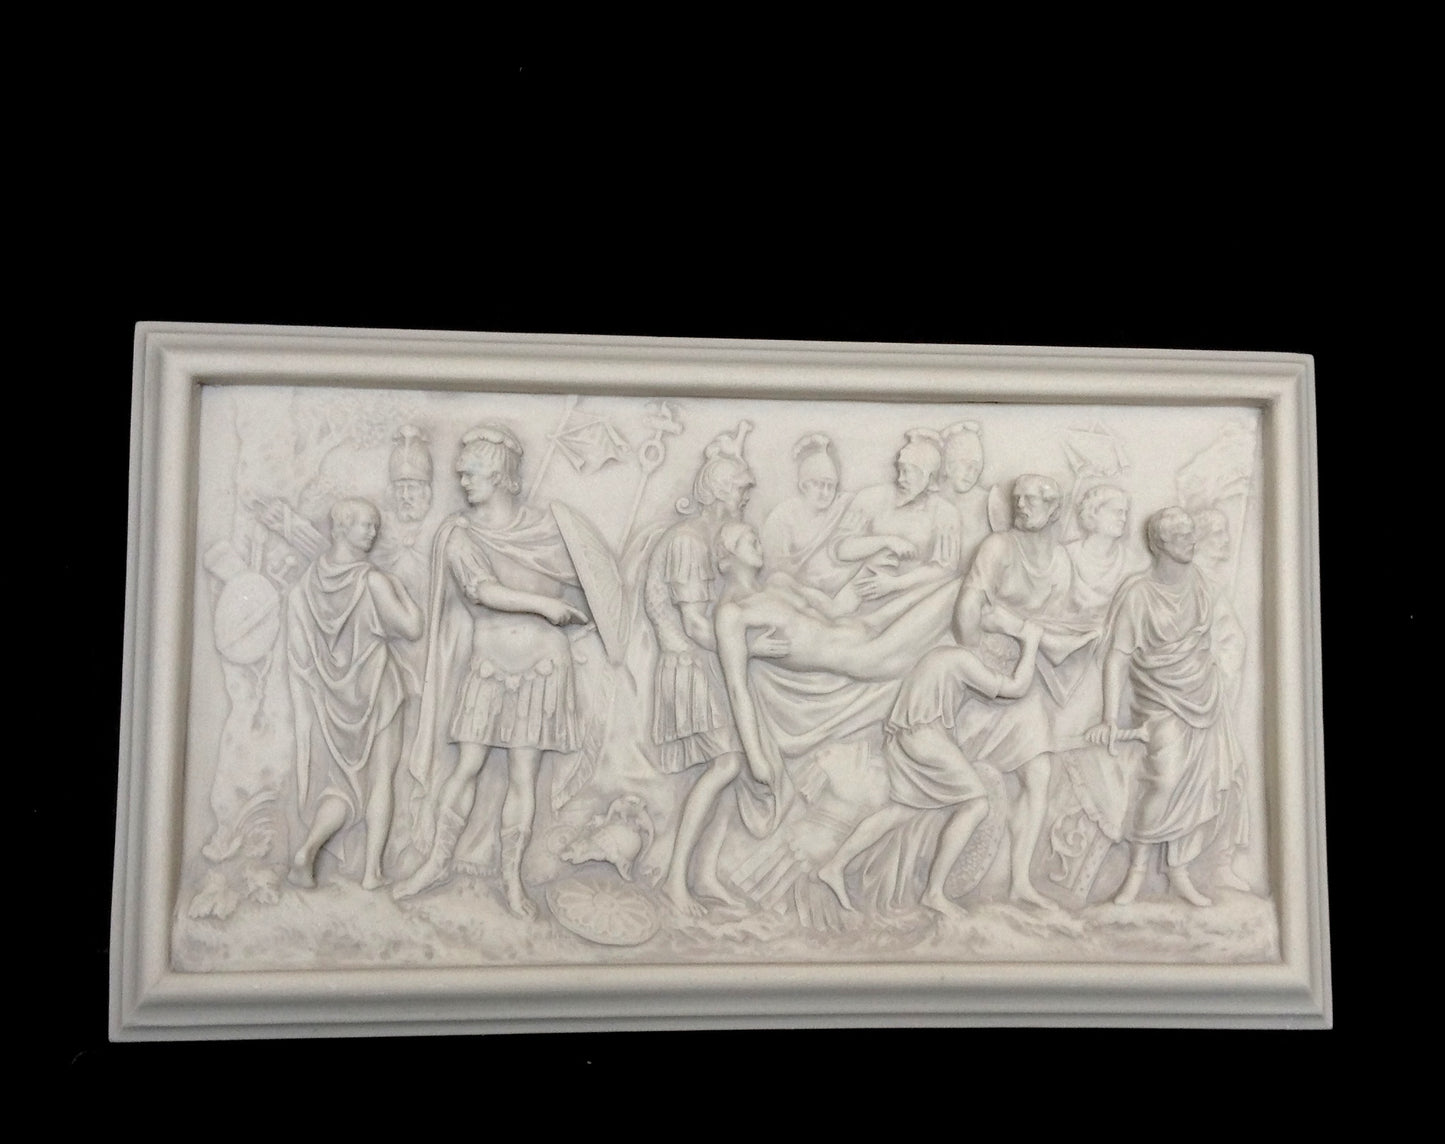 The Carrying of Hector Plaque